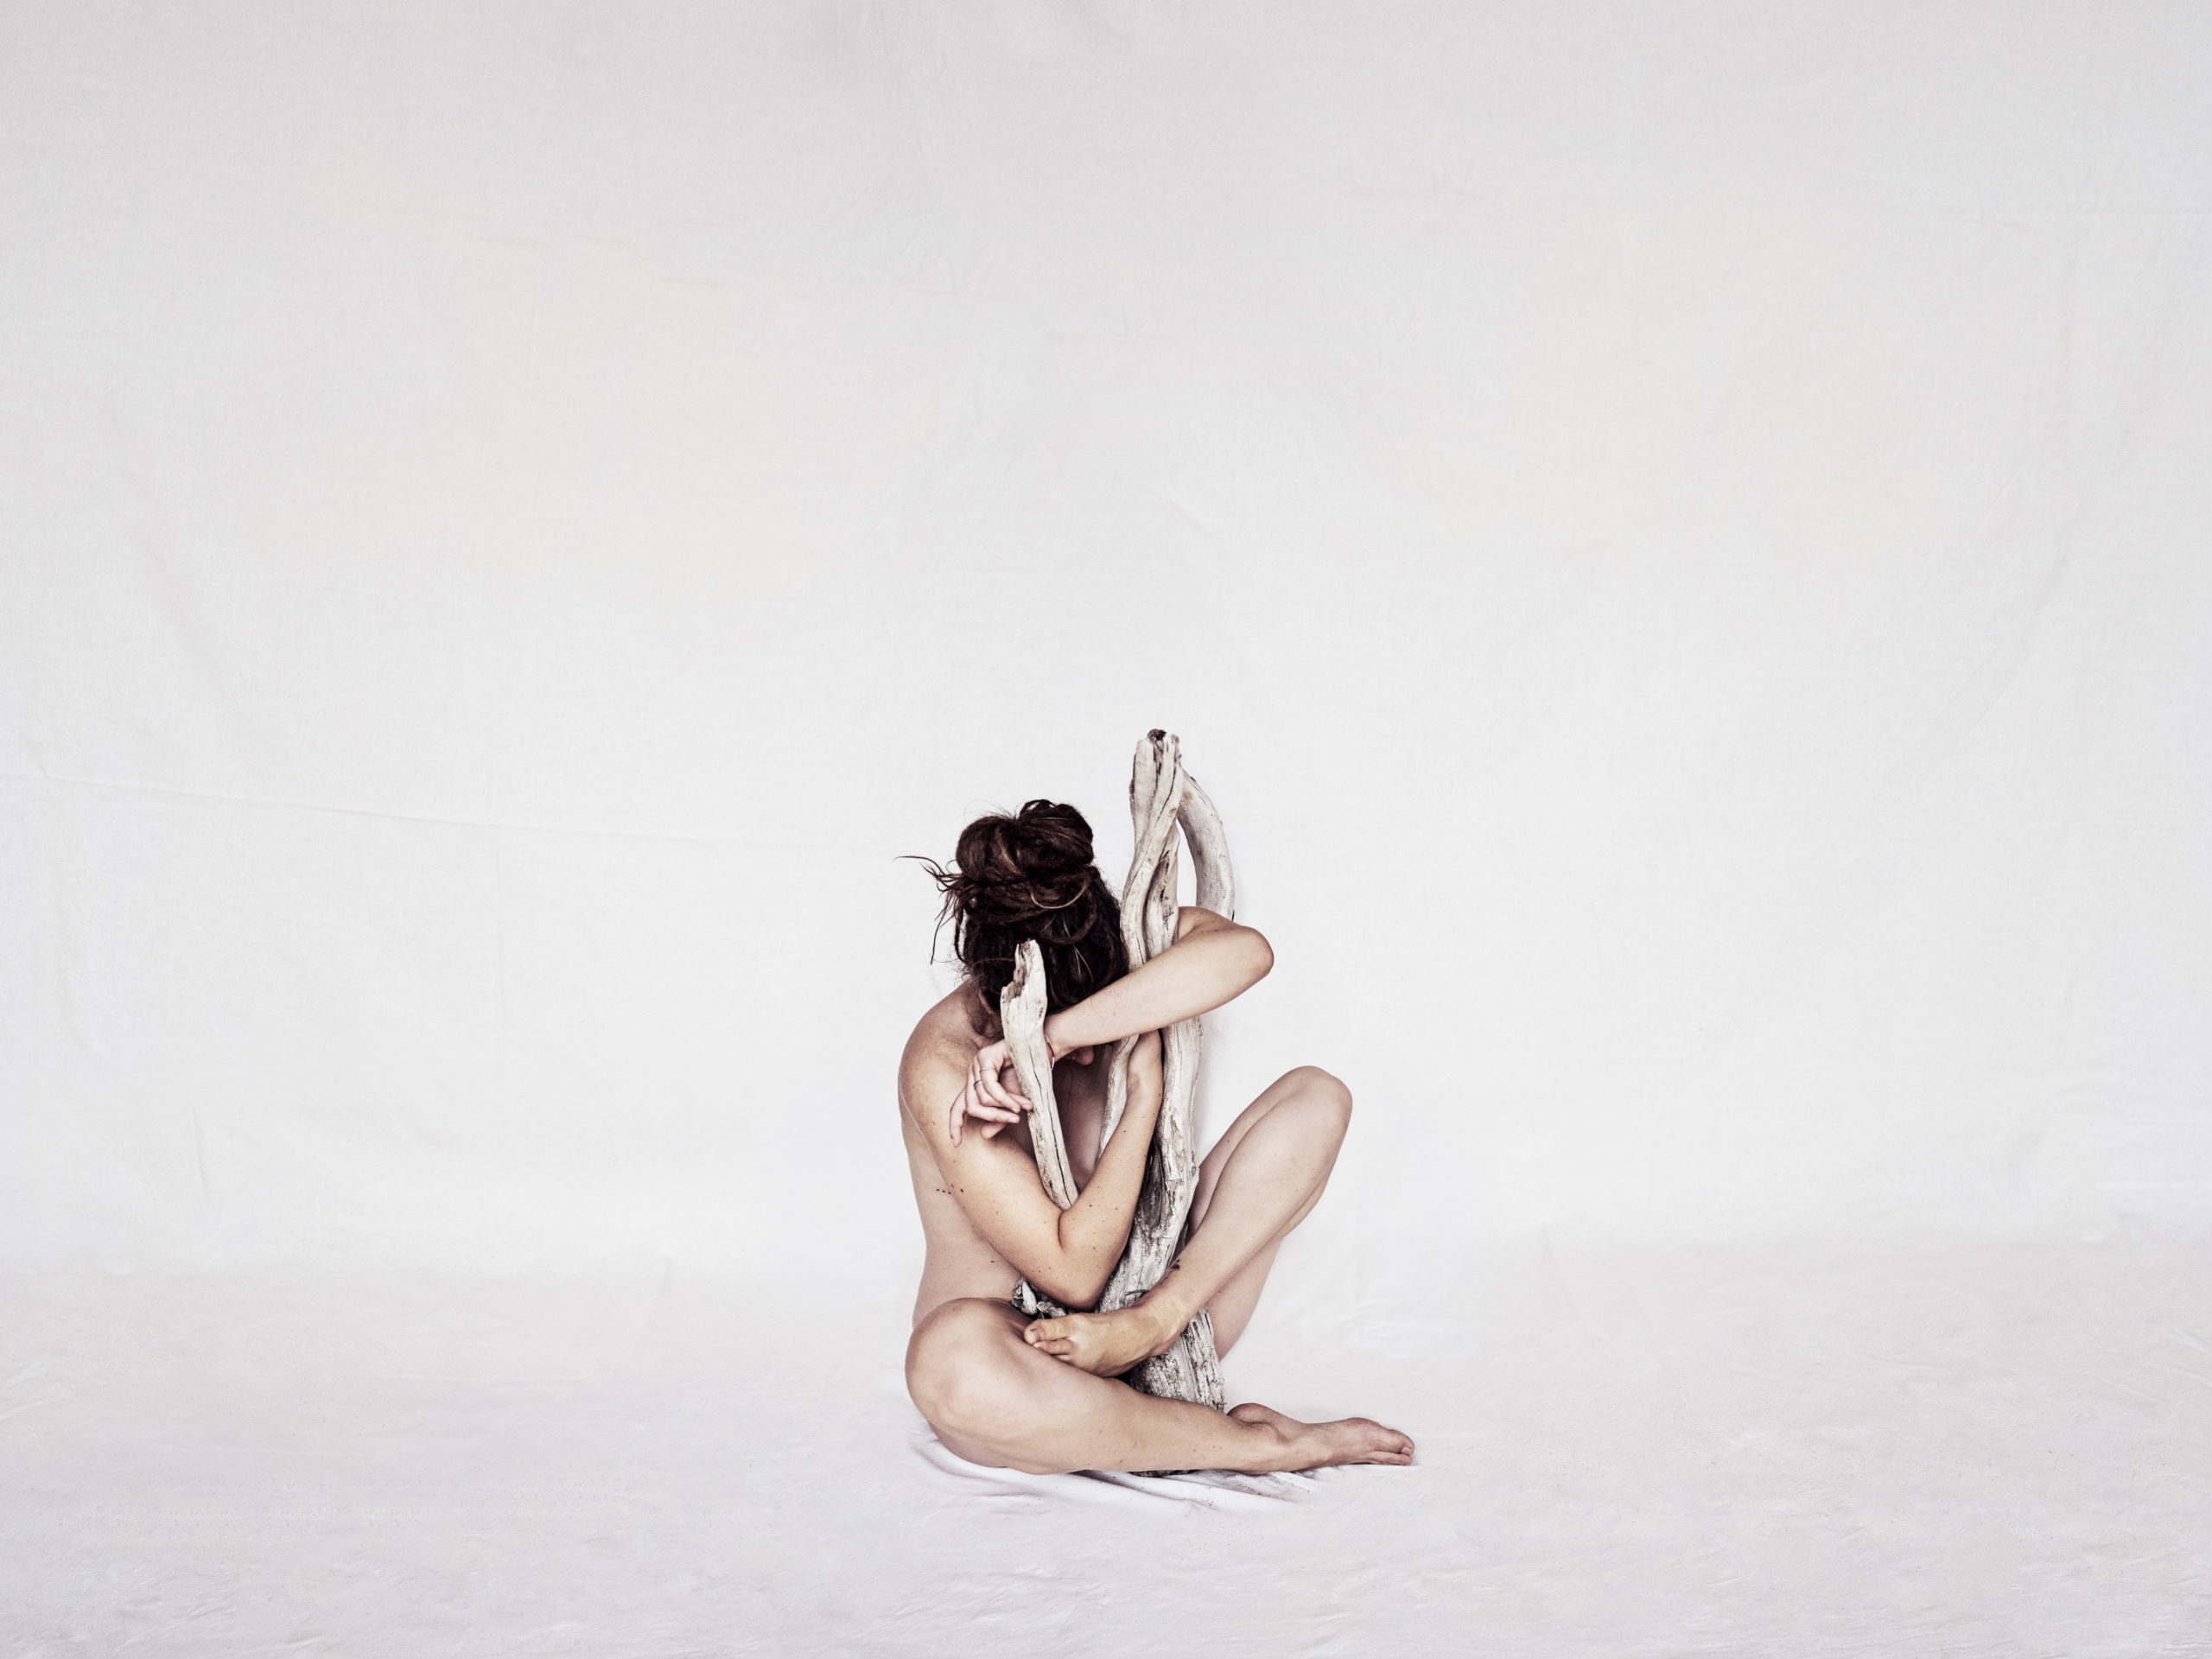 Self portrait of an undressed woman in a white space symbolizing personal growth.